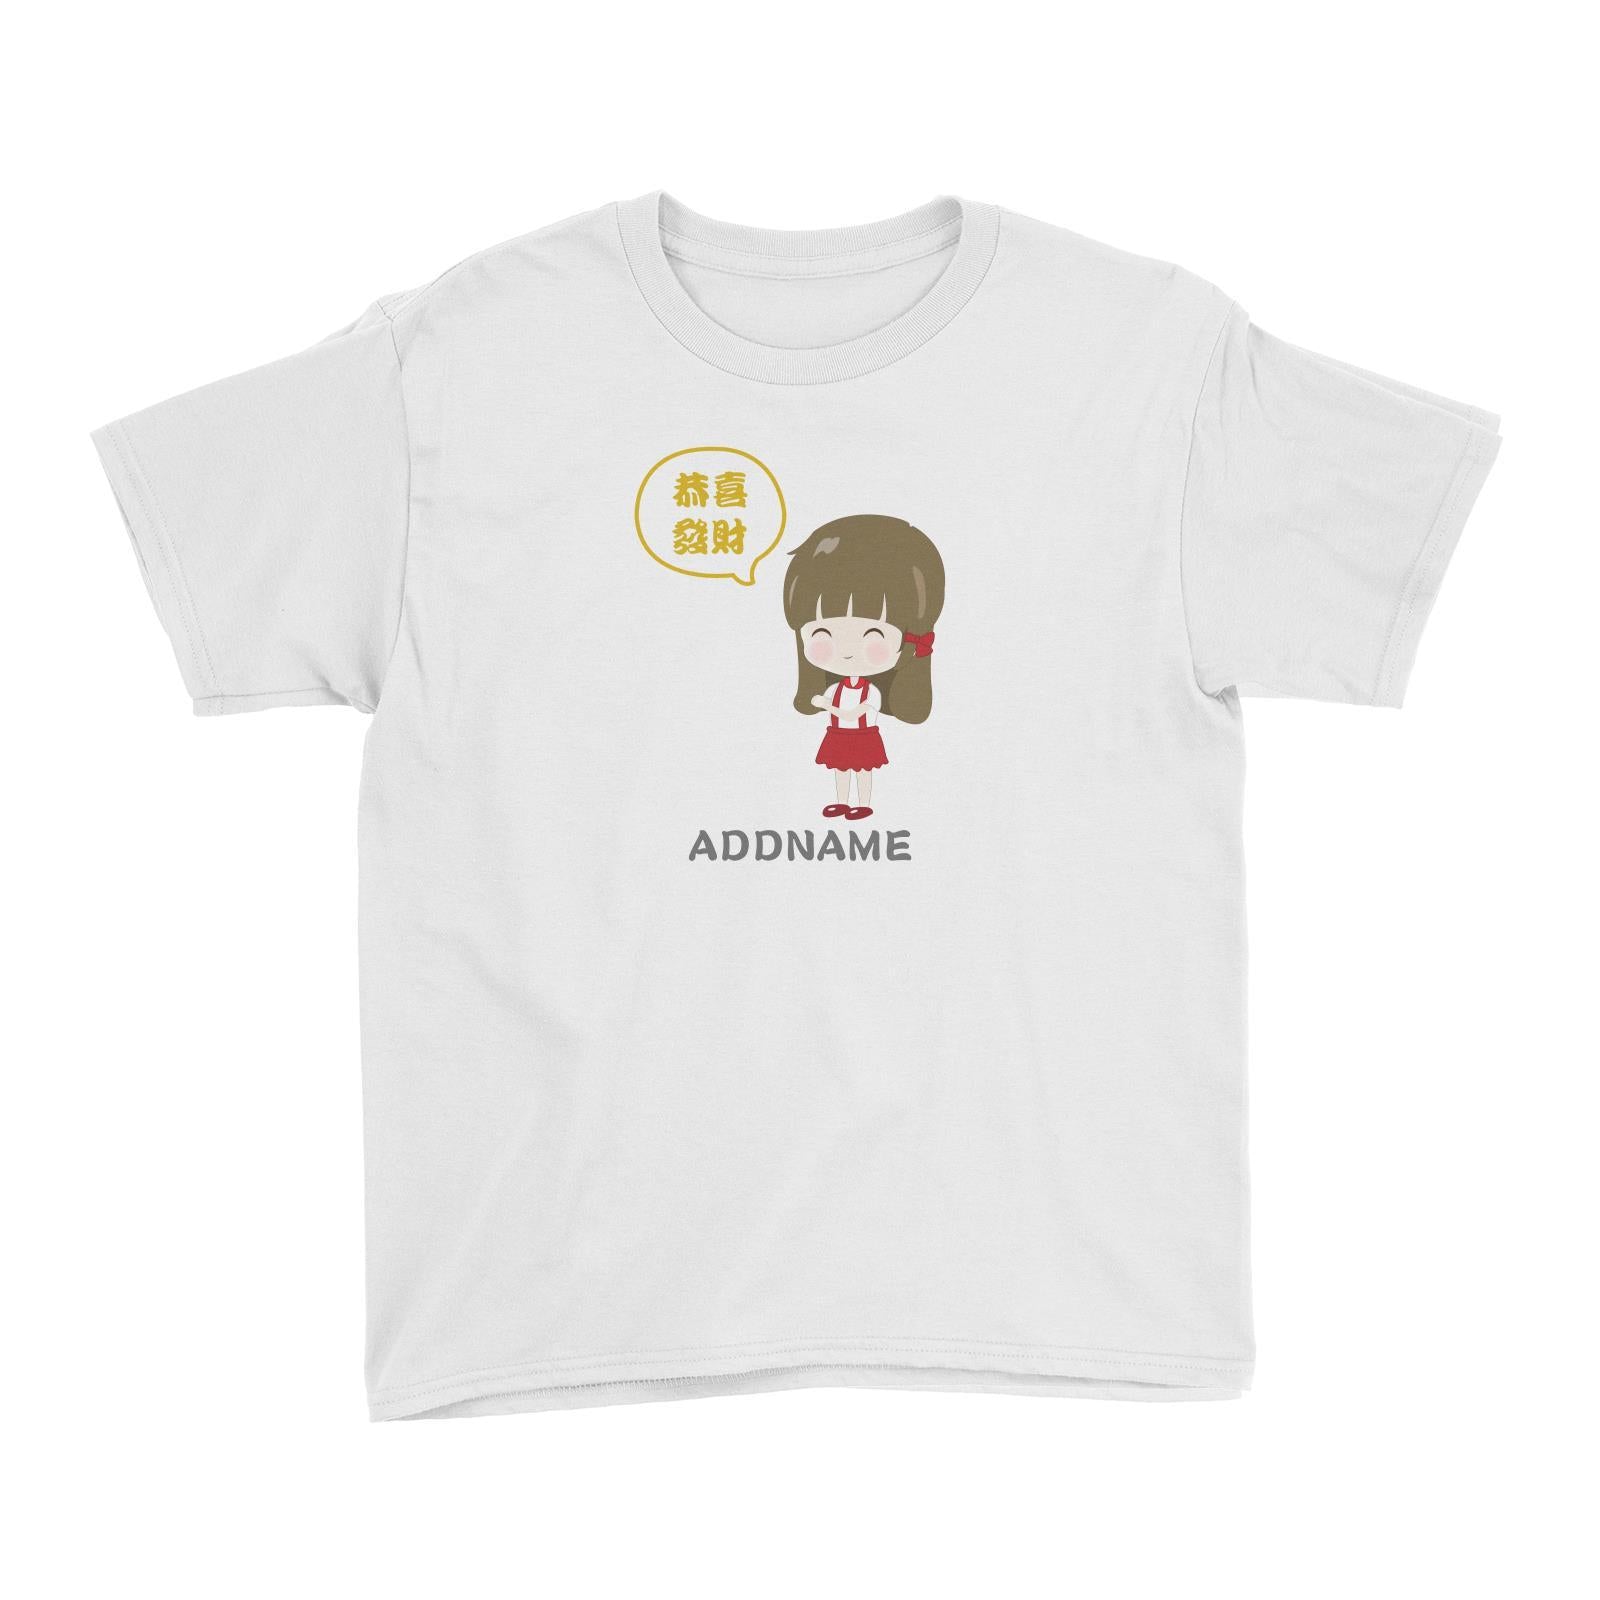 Chinese New Year Family Gong Xi Fai Cai Girl Addname Kid's T-Shirt